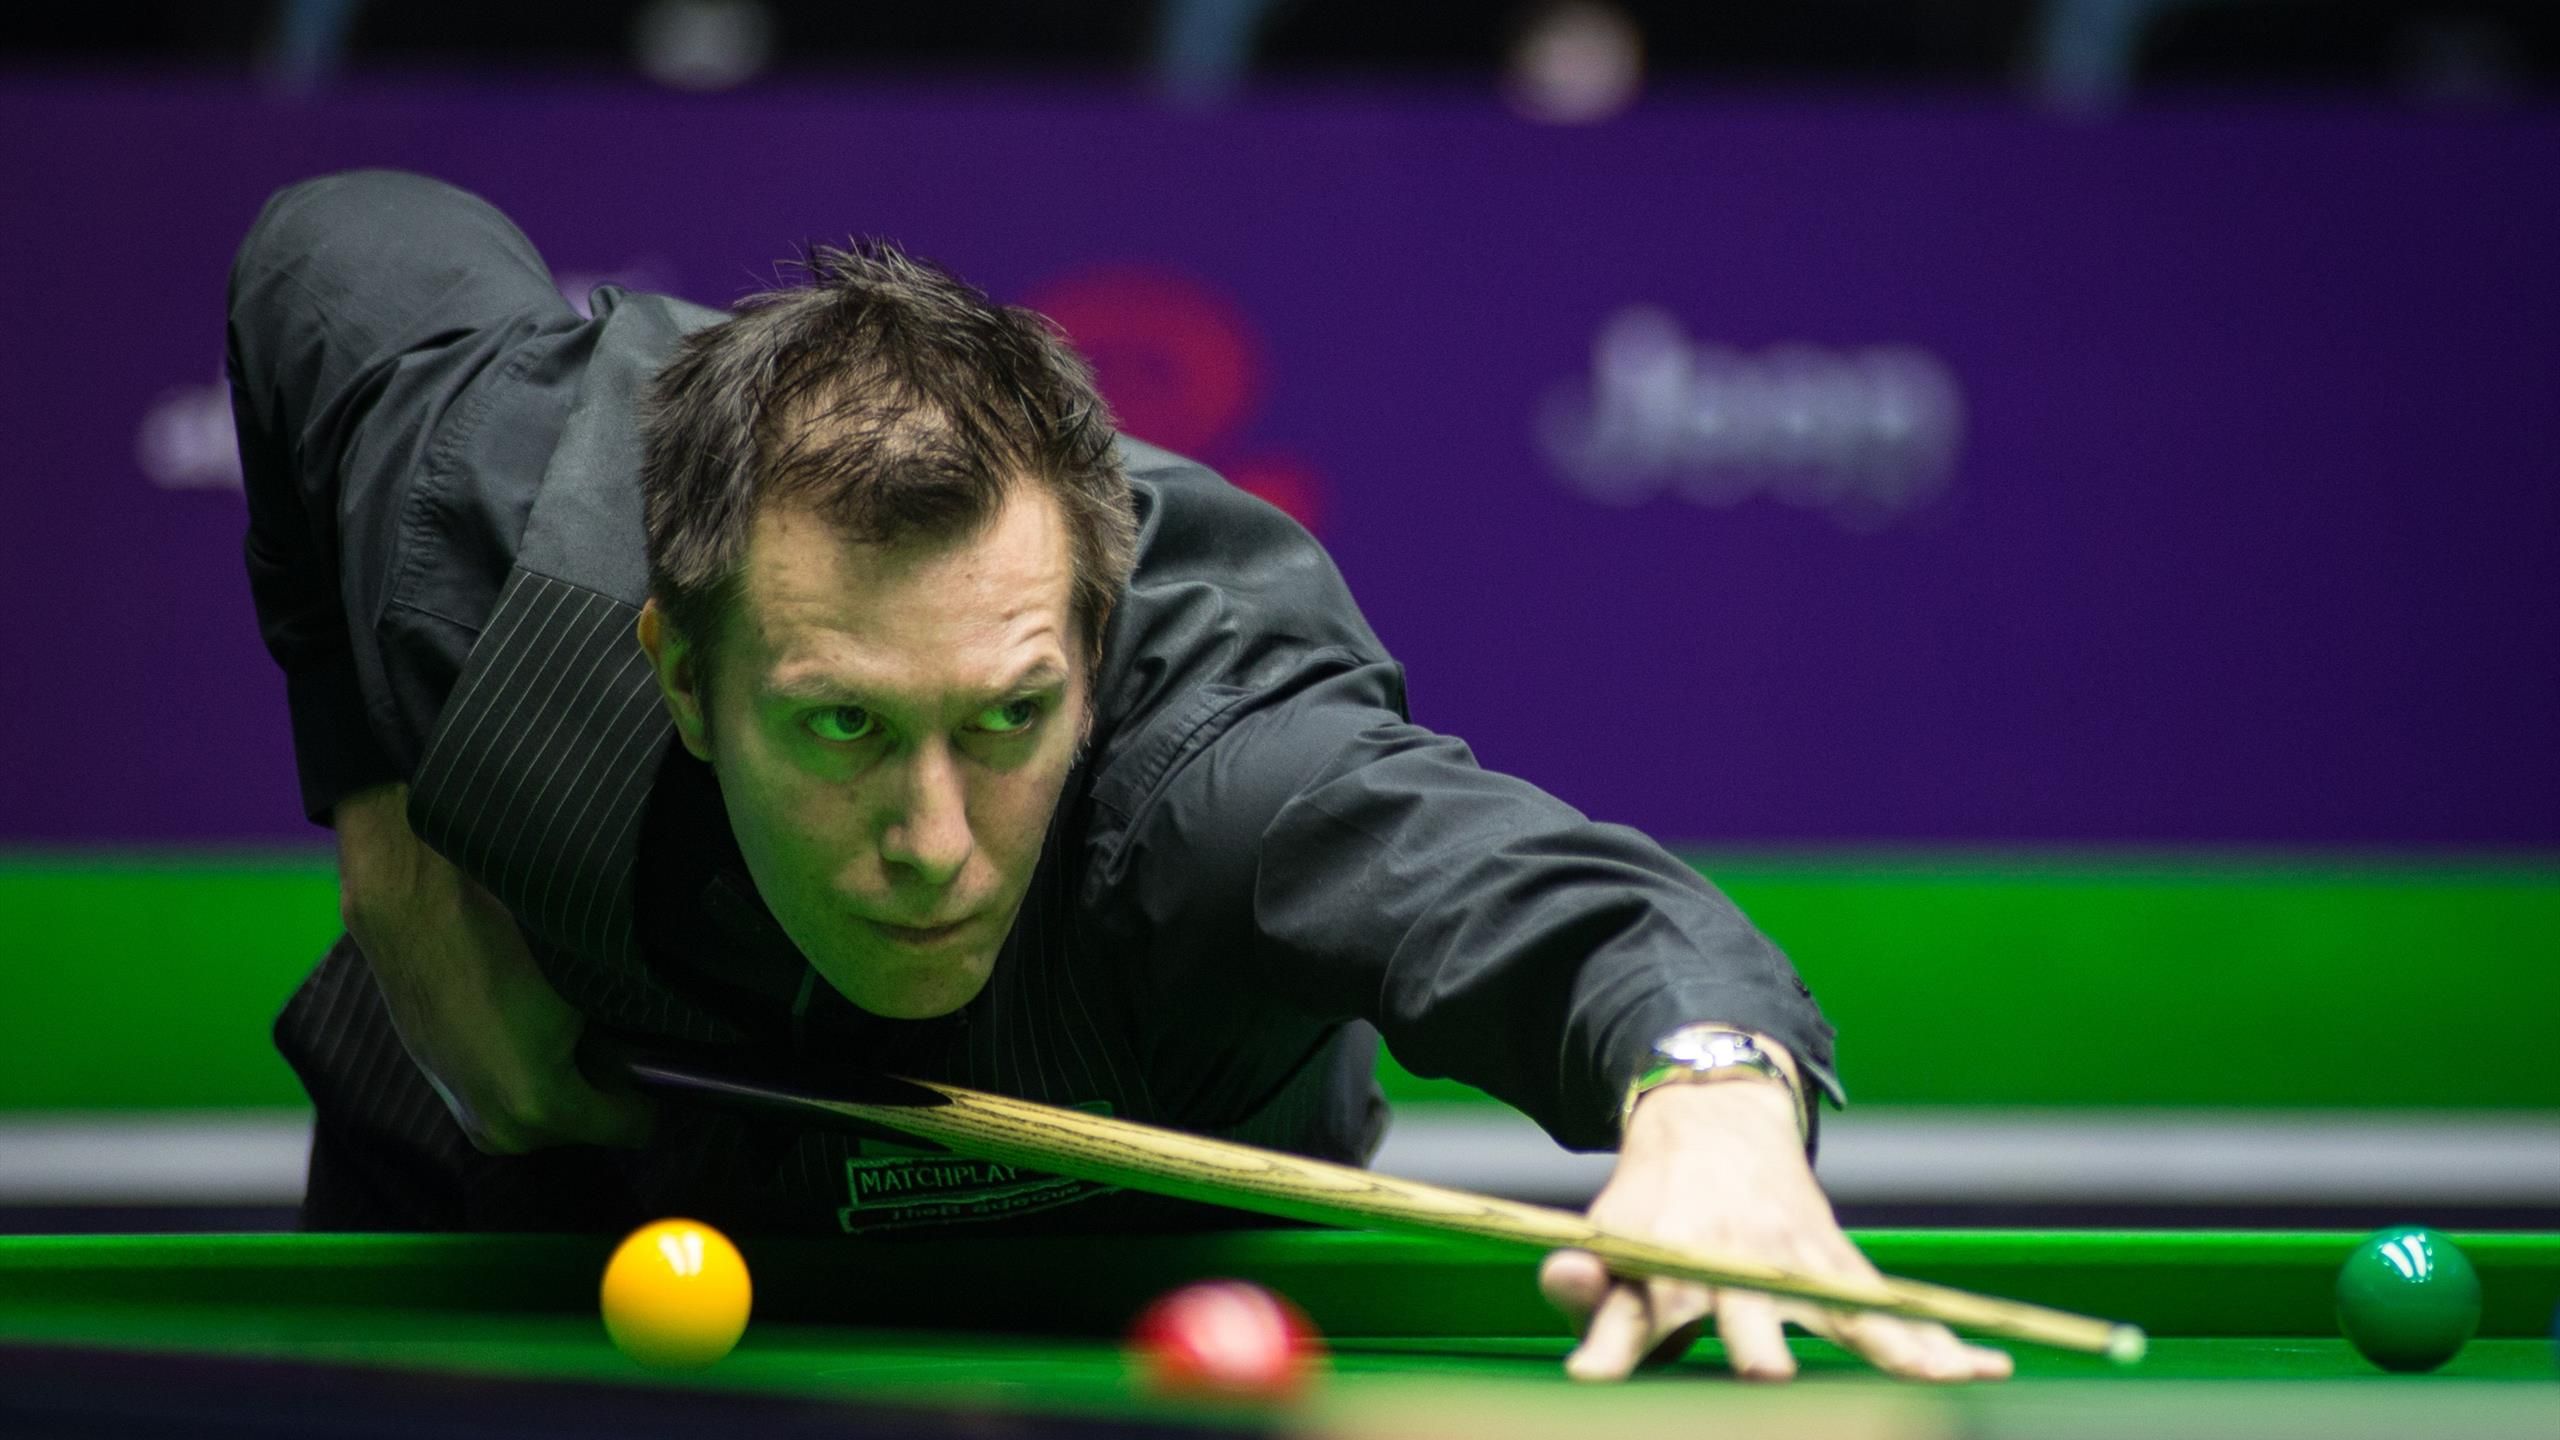 It is great and horrible at the same time - Snooker Shoot Out takes players out of comfort zone, says Dominic Dale